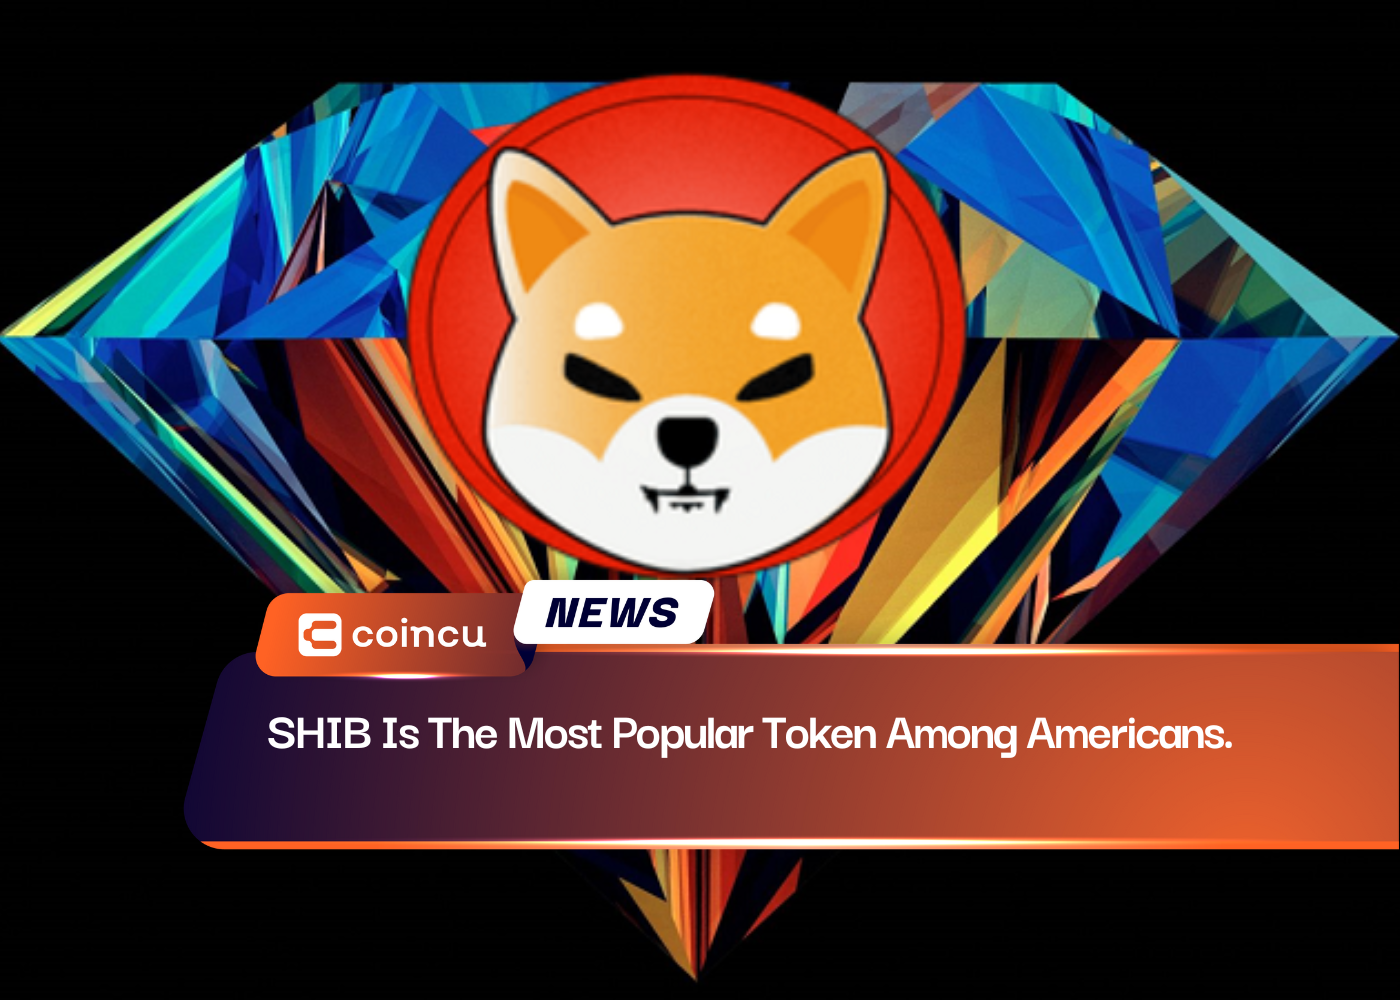 SHIB Is The Most Popular Token Among Americans.